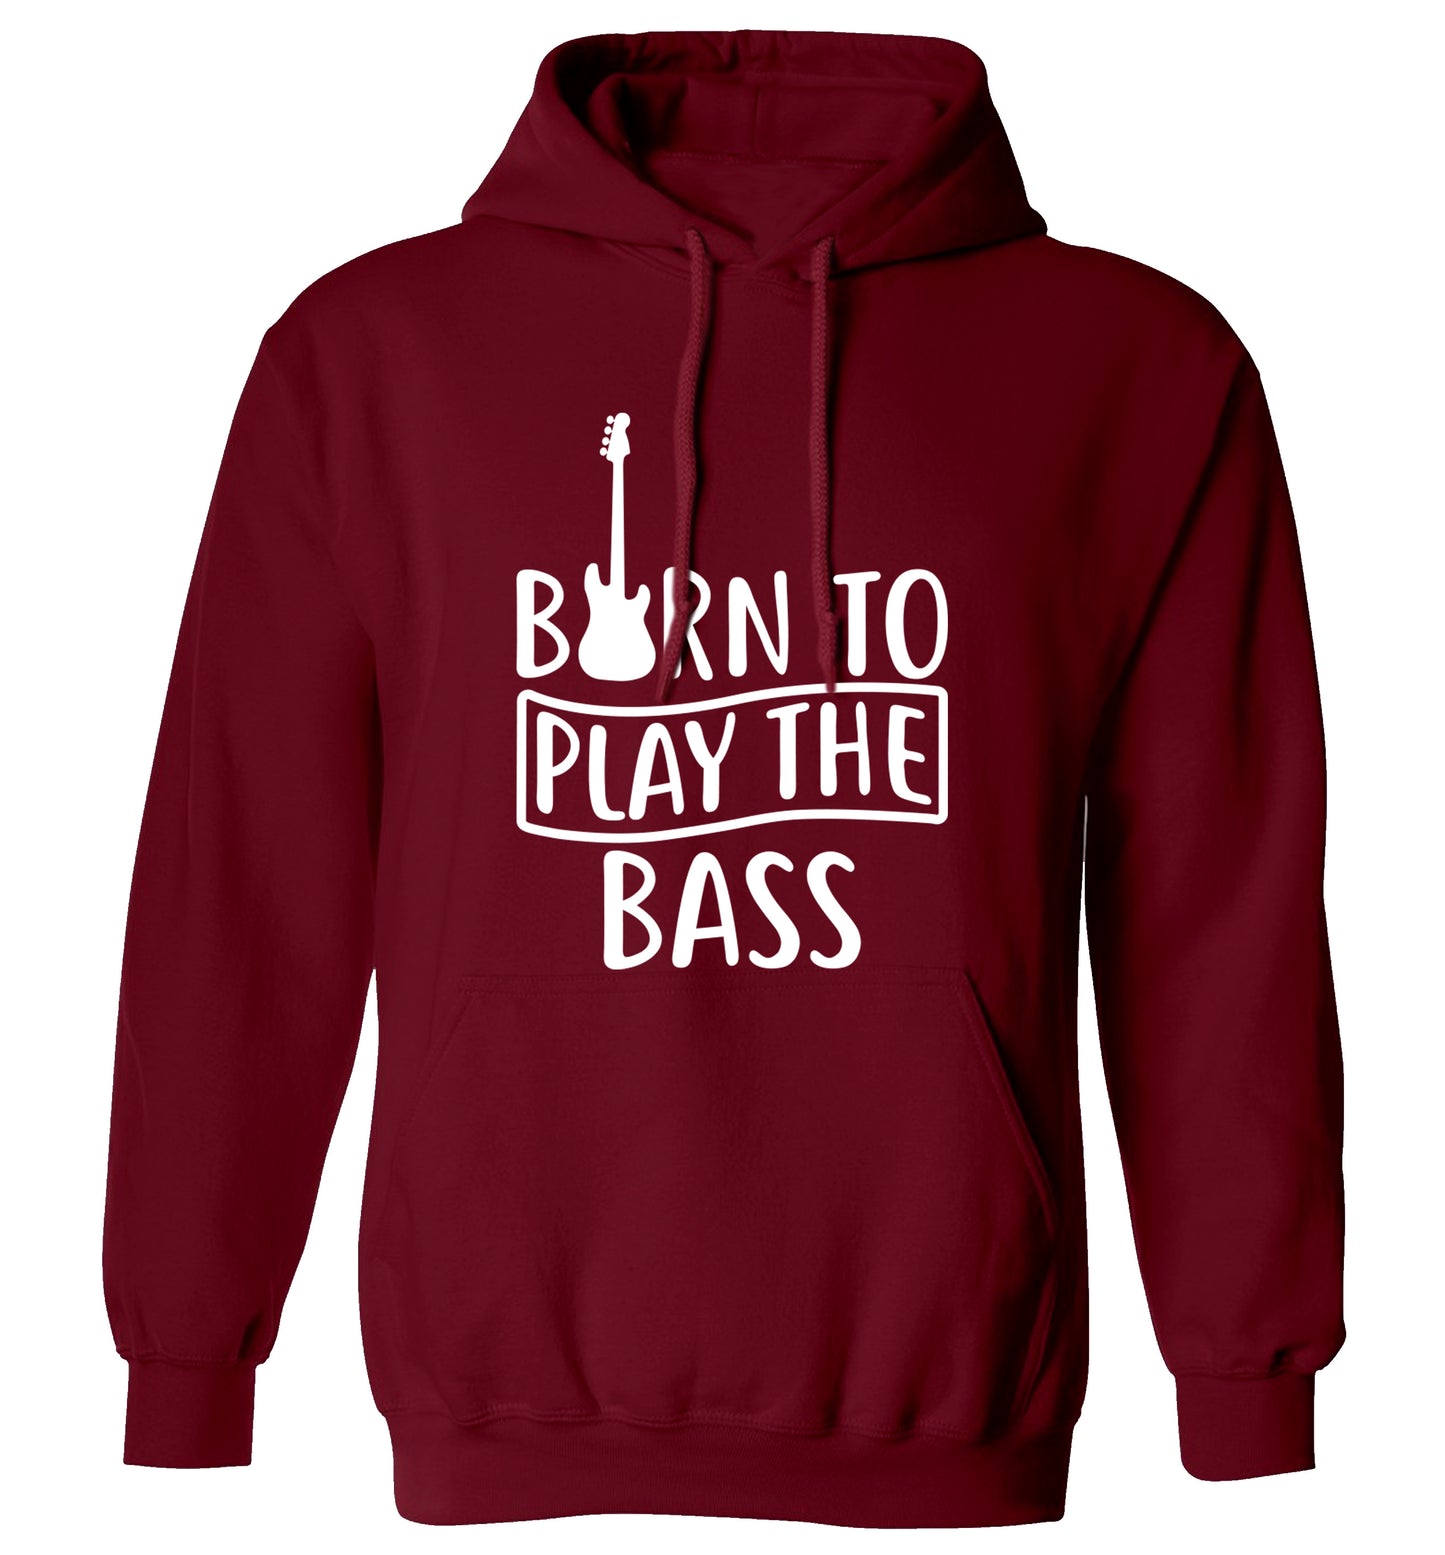 Born to play the bass adults unisex maroon hoodie 2XL